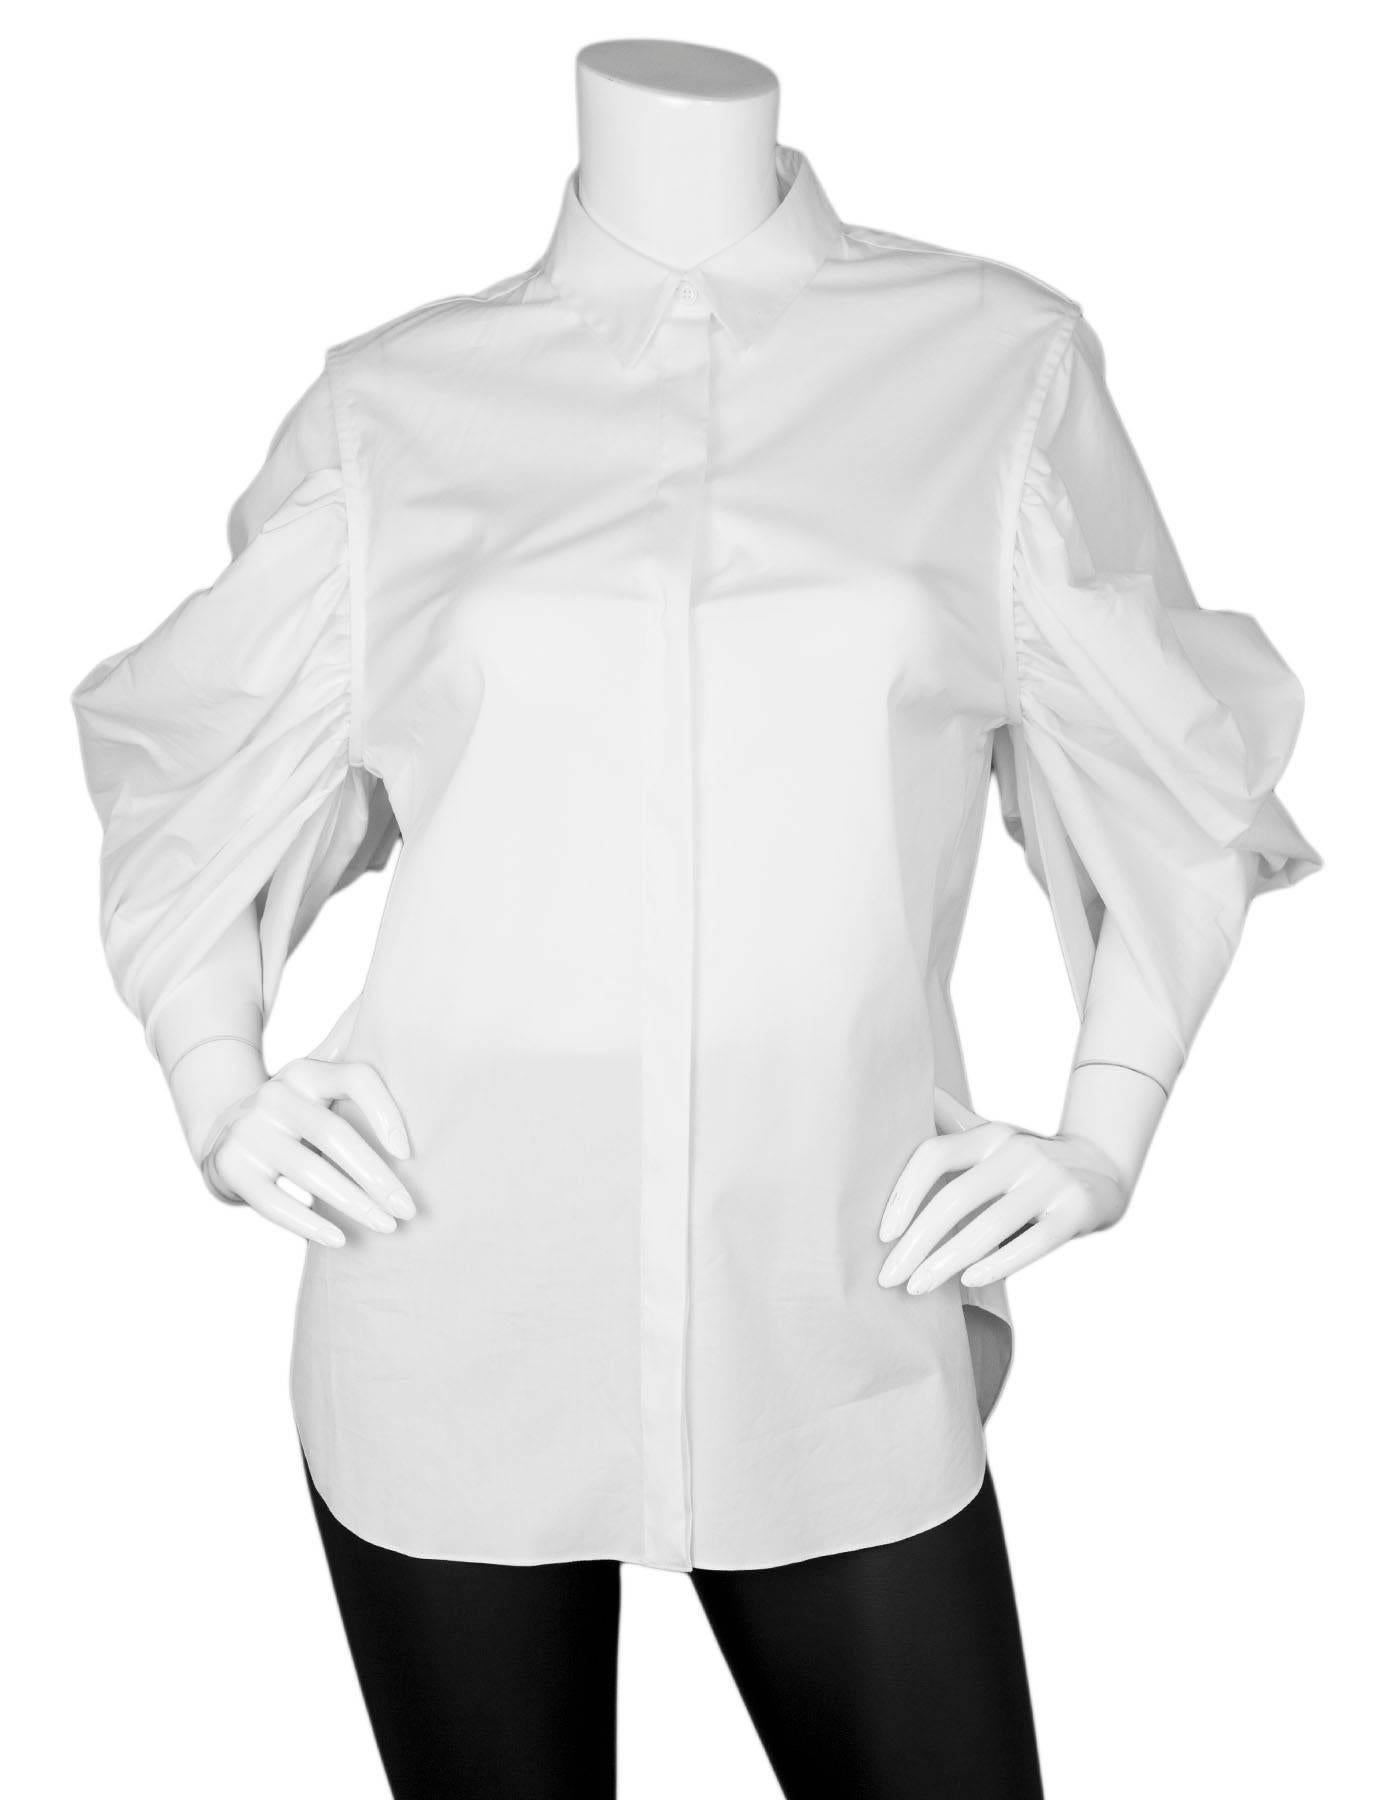 Christian Dior White Cotton Puff Sleeve Blouse Sz FR40 NWT

Made In: Italy
Color: White
Composition: 72% cotton, 23% polyamide, 5% spandex
Lining: None
Closure/Opening: Front button closure
Exterior Pockets: None
Interior Pockets: None
Retail Price: